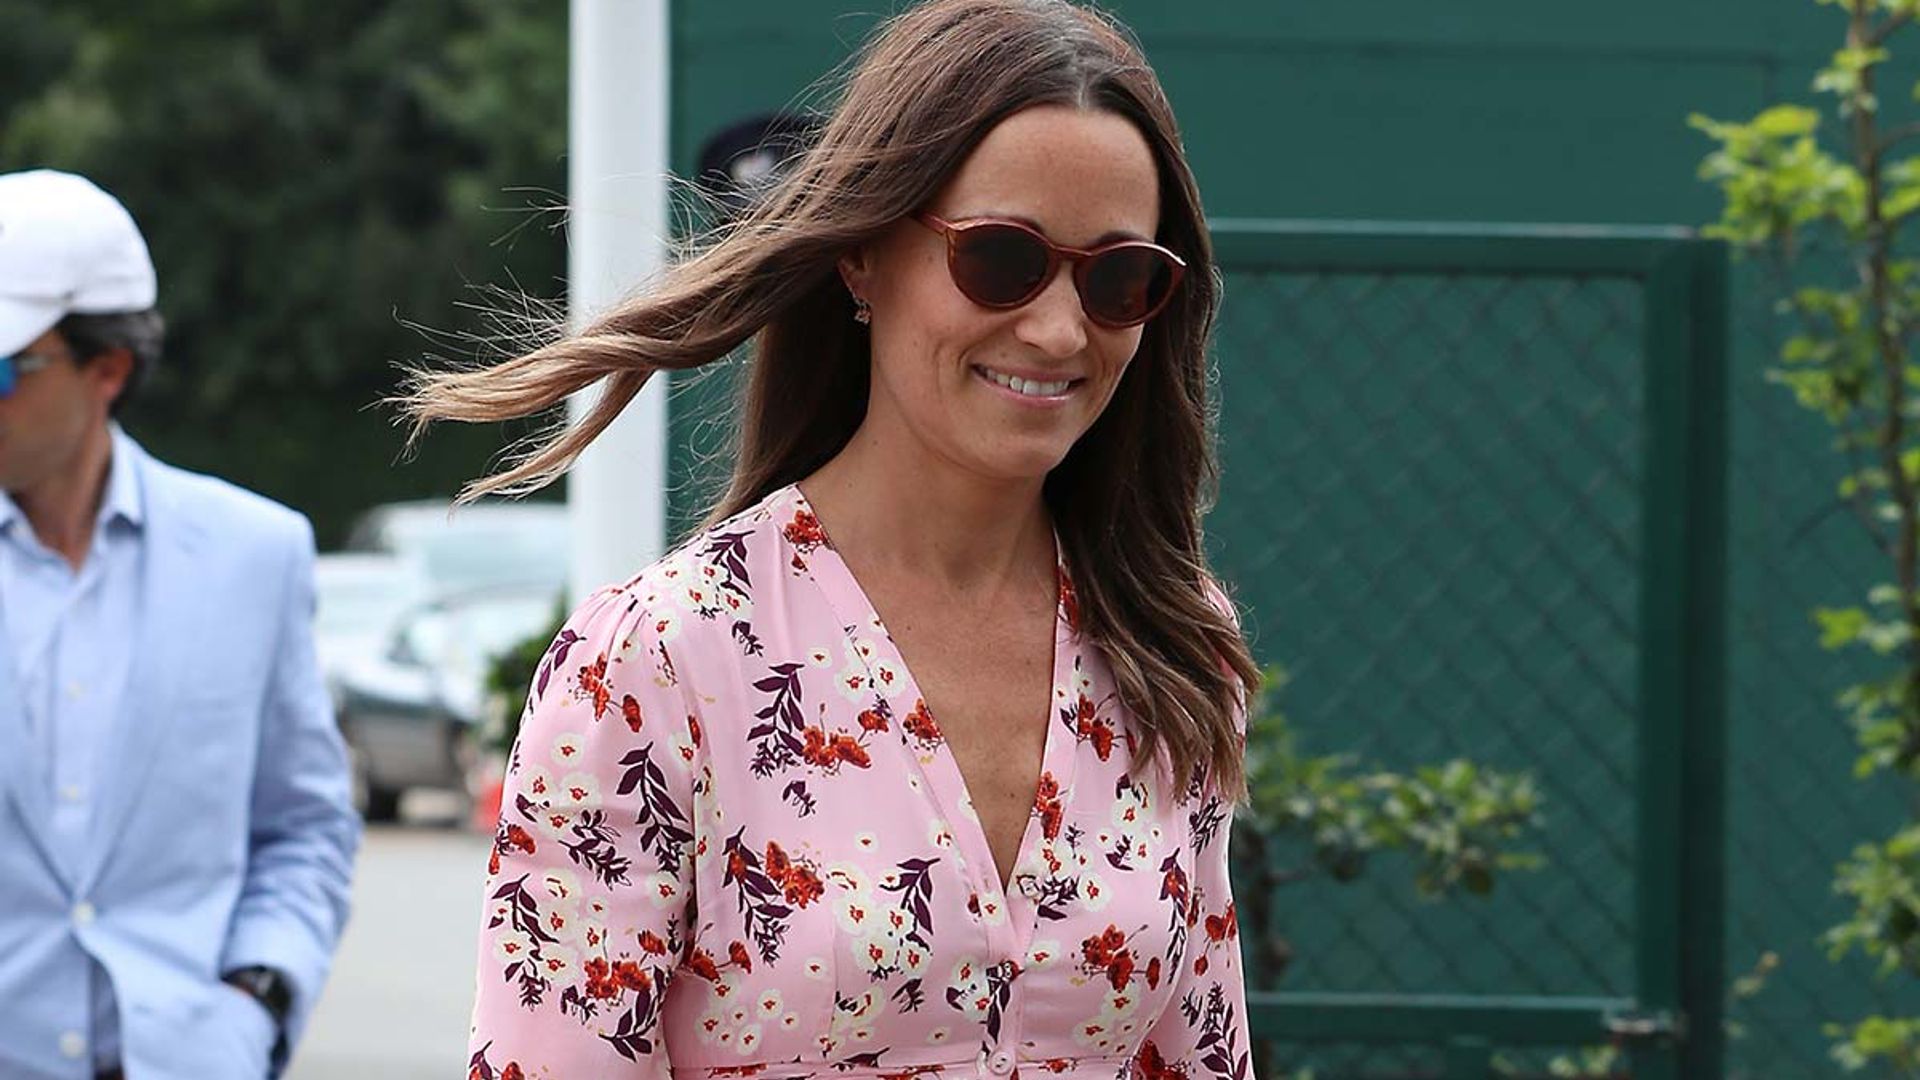 Marks & Spencer’s new pink dress totally reminds us of Pippa Middleton's fabulous Wimbledon dress